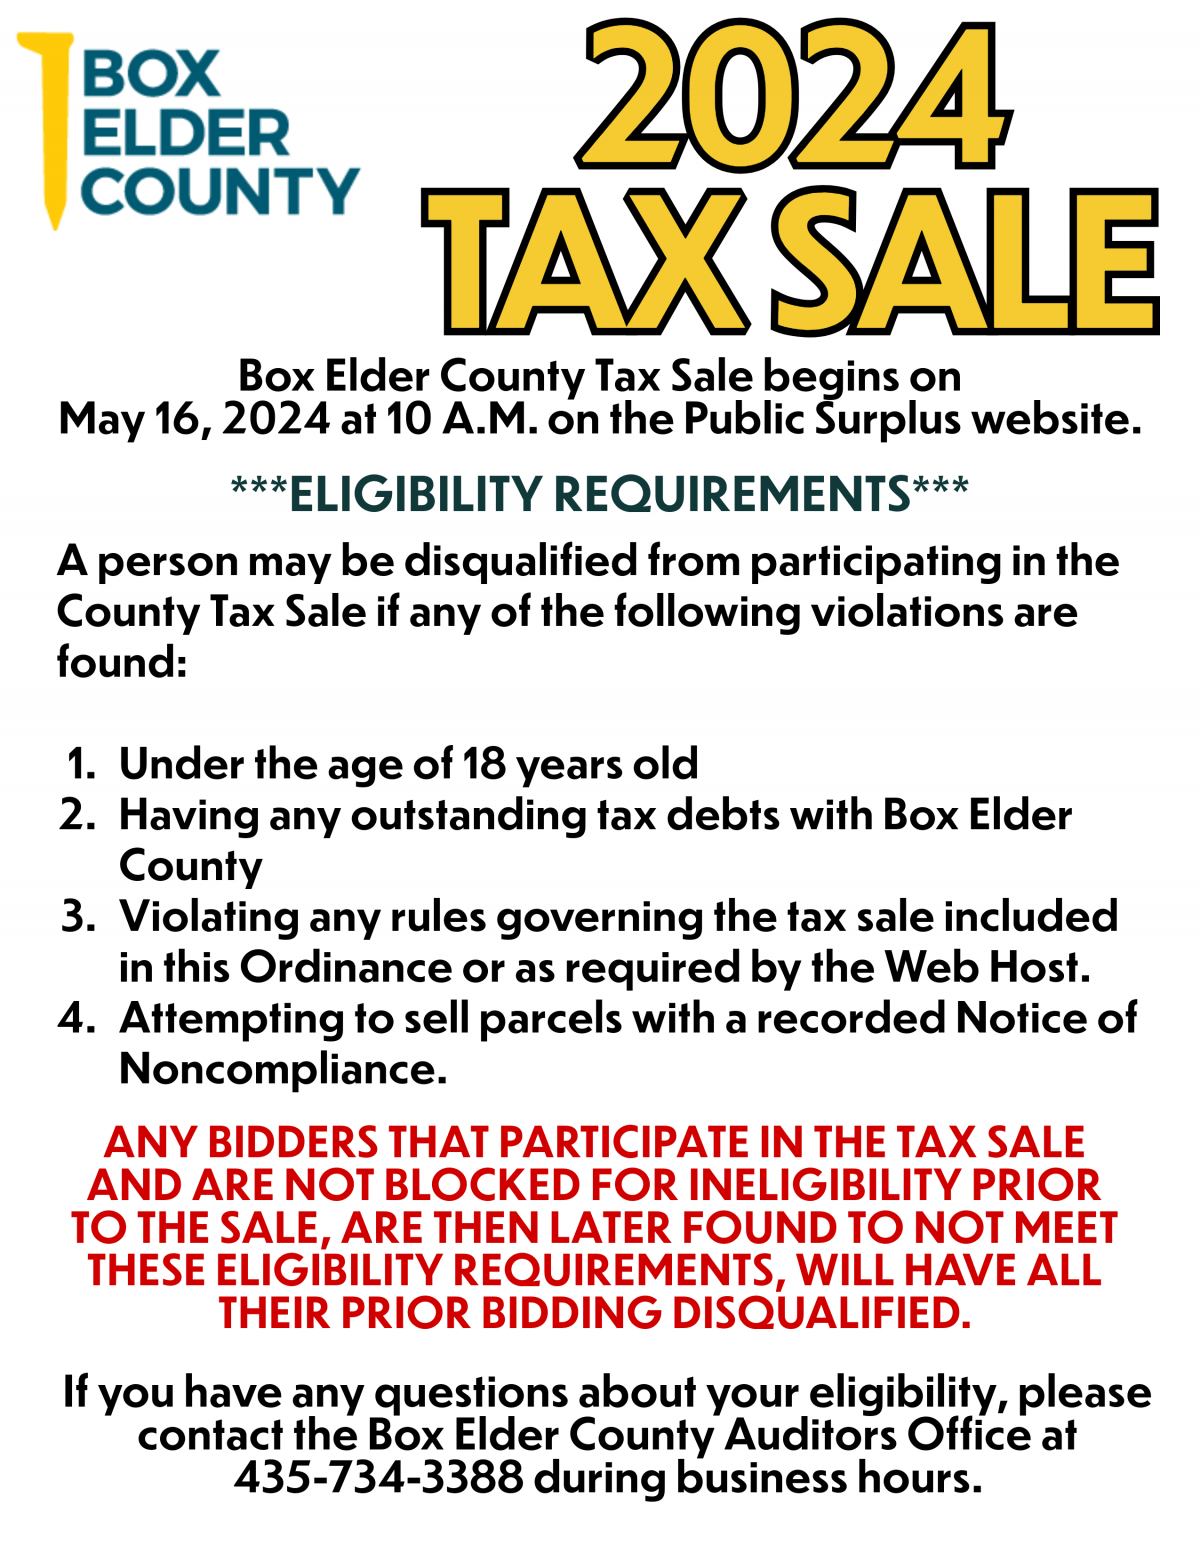 Eligibility Guidelines for the 2024 Box Elder County Tax Sale